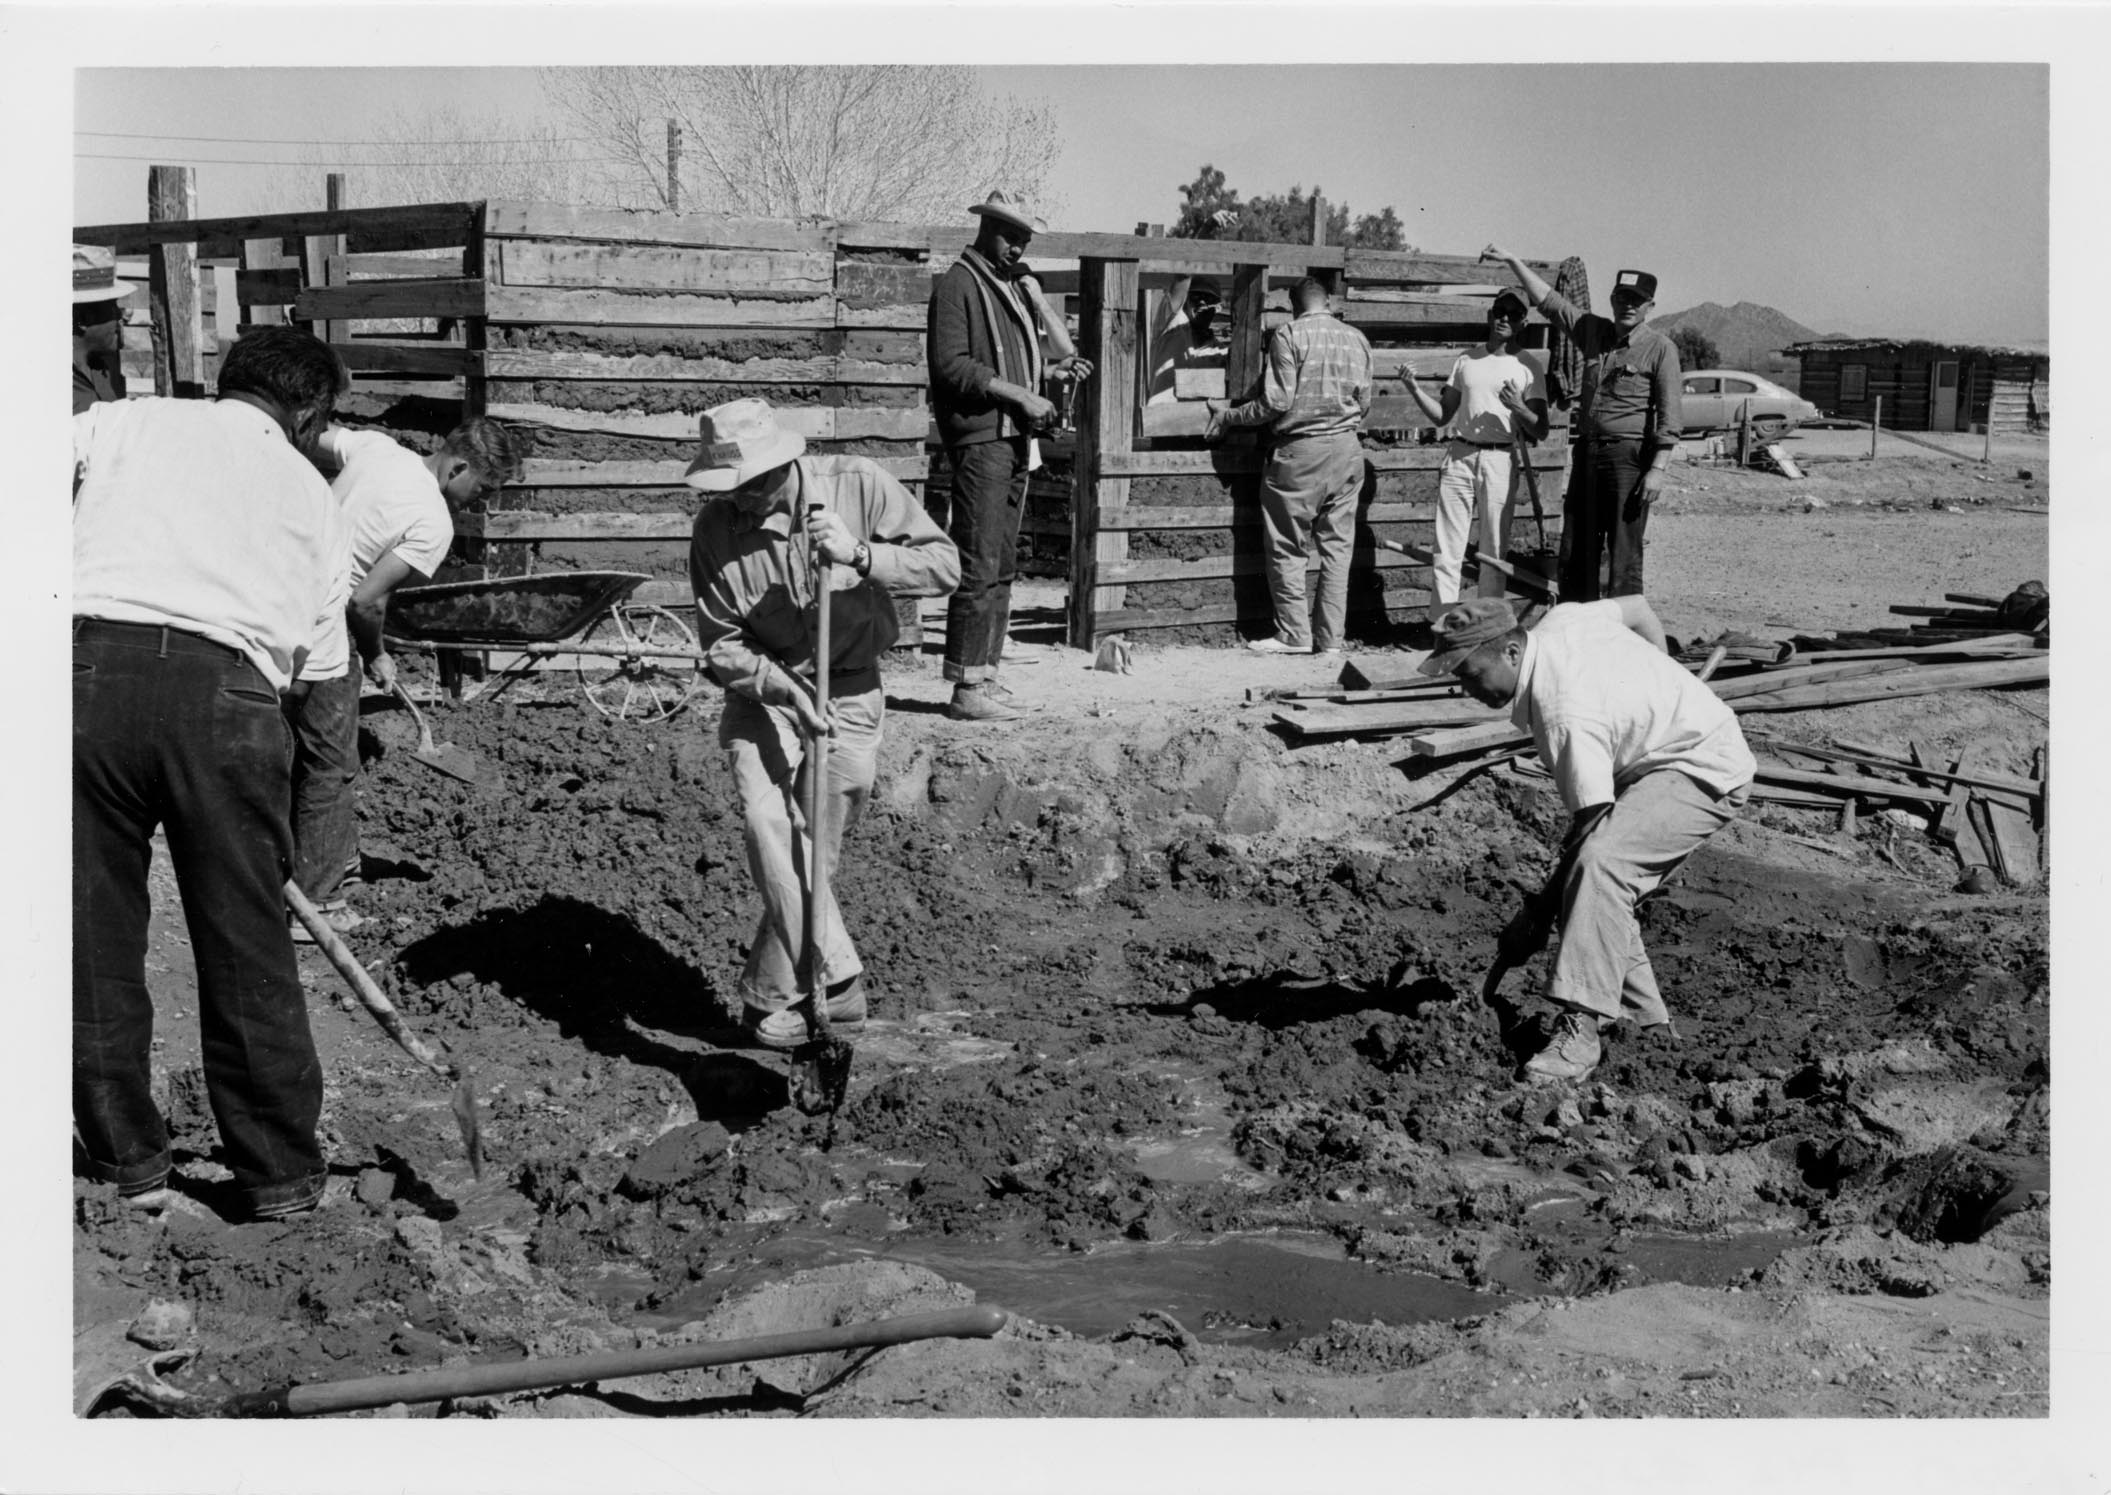 Black and white photo of three men dig in dirt with shovels. Another group of men stand along a wooden fence in the background.